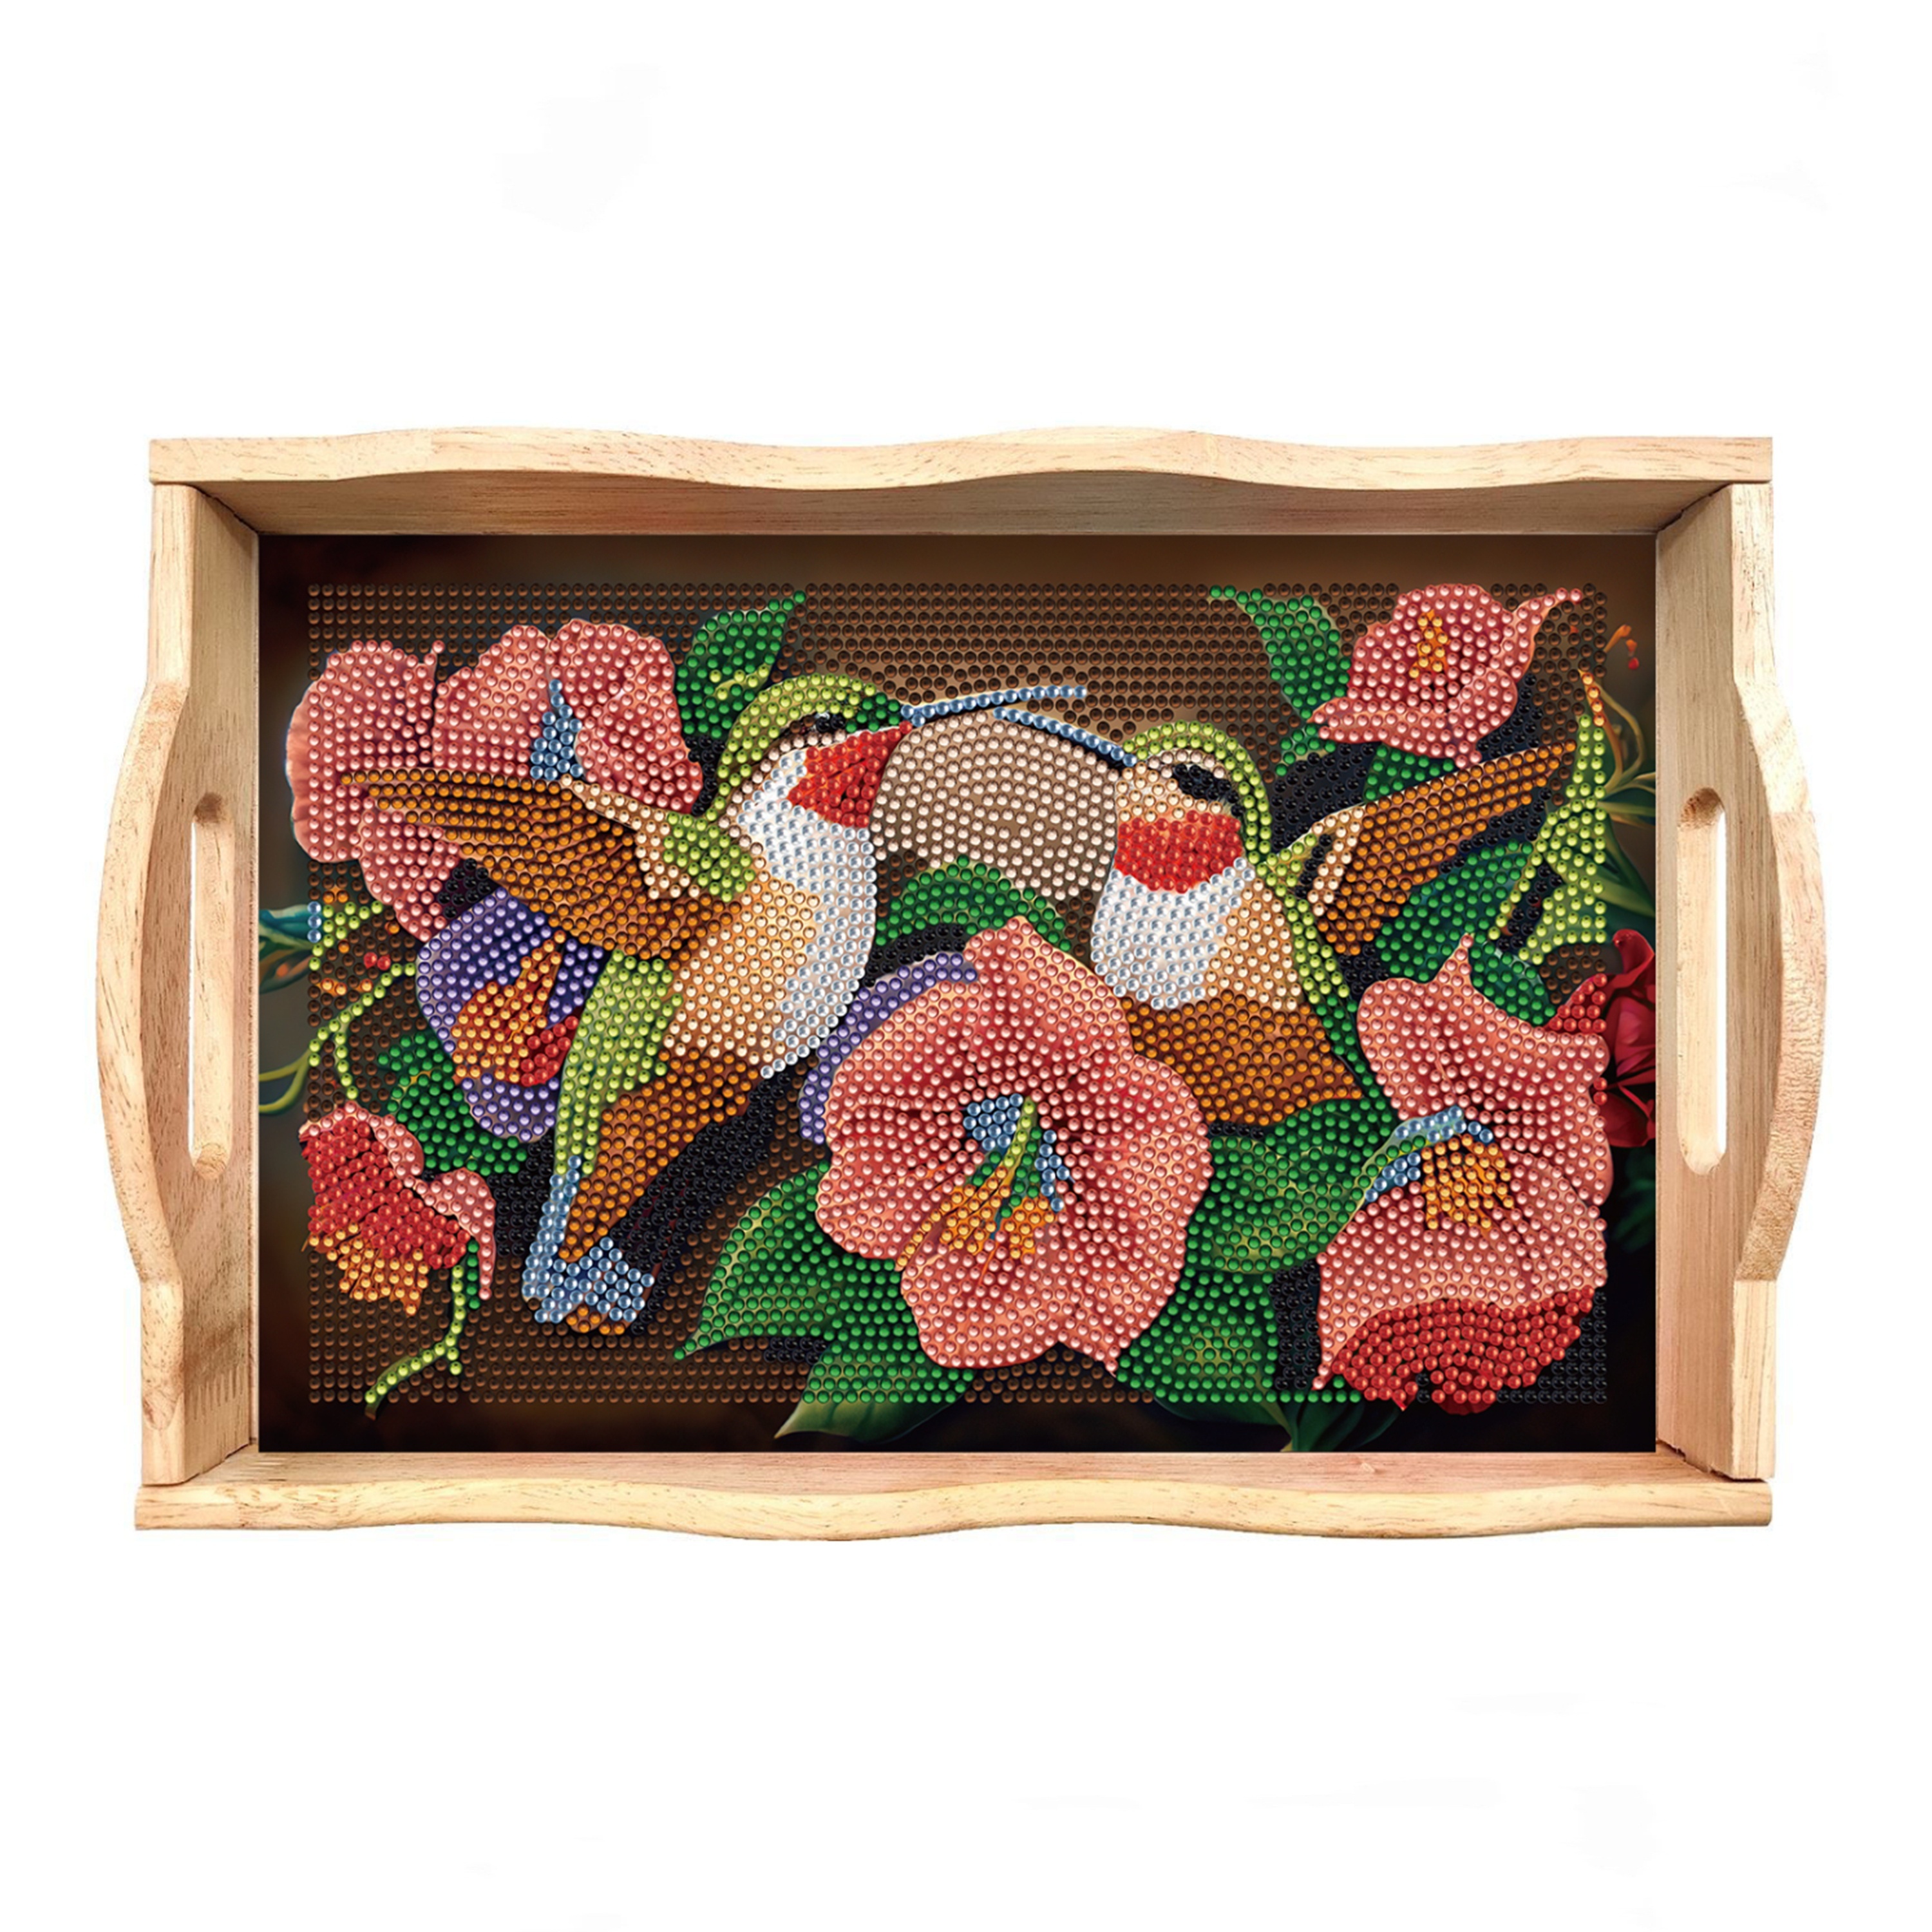 

Diy Diamond Painting Tray Kit: Create A Vibrant Flower And Hummingbird Design On A Wooden Tray With Round And Shaped Diamonds